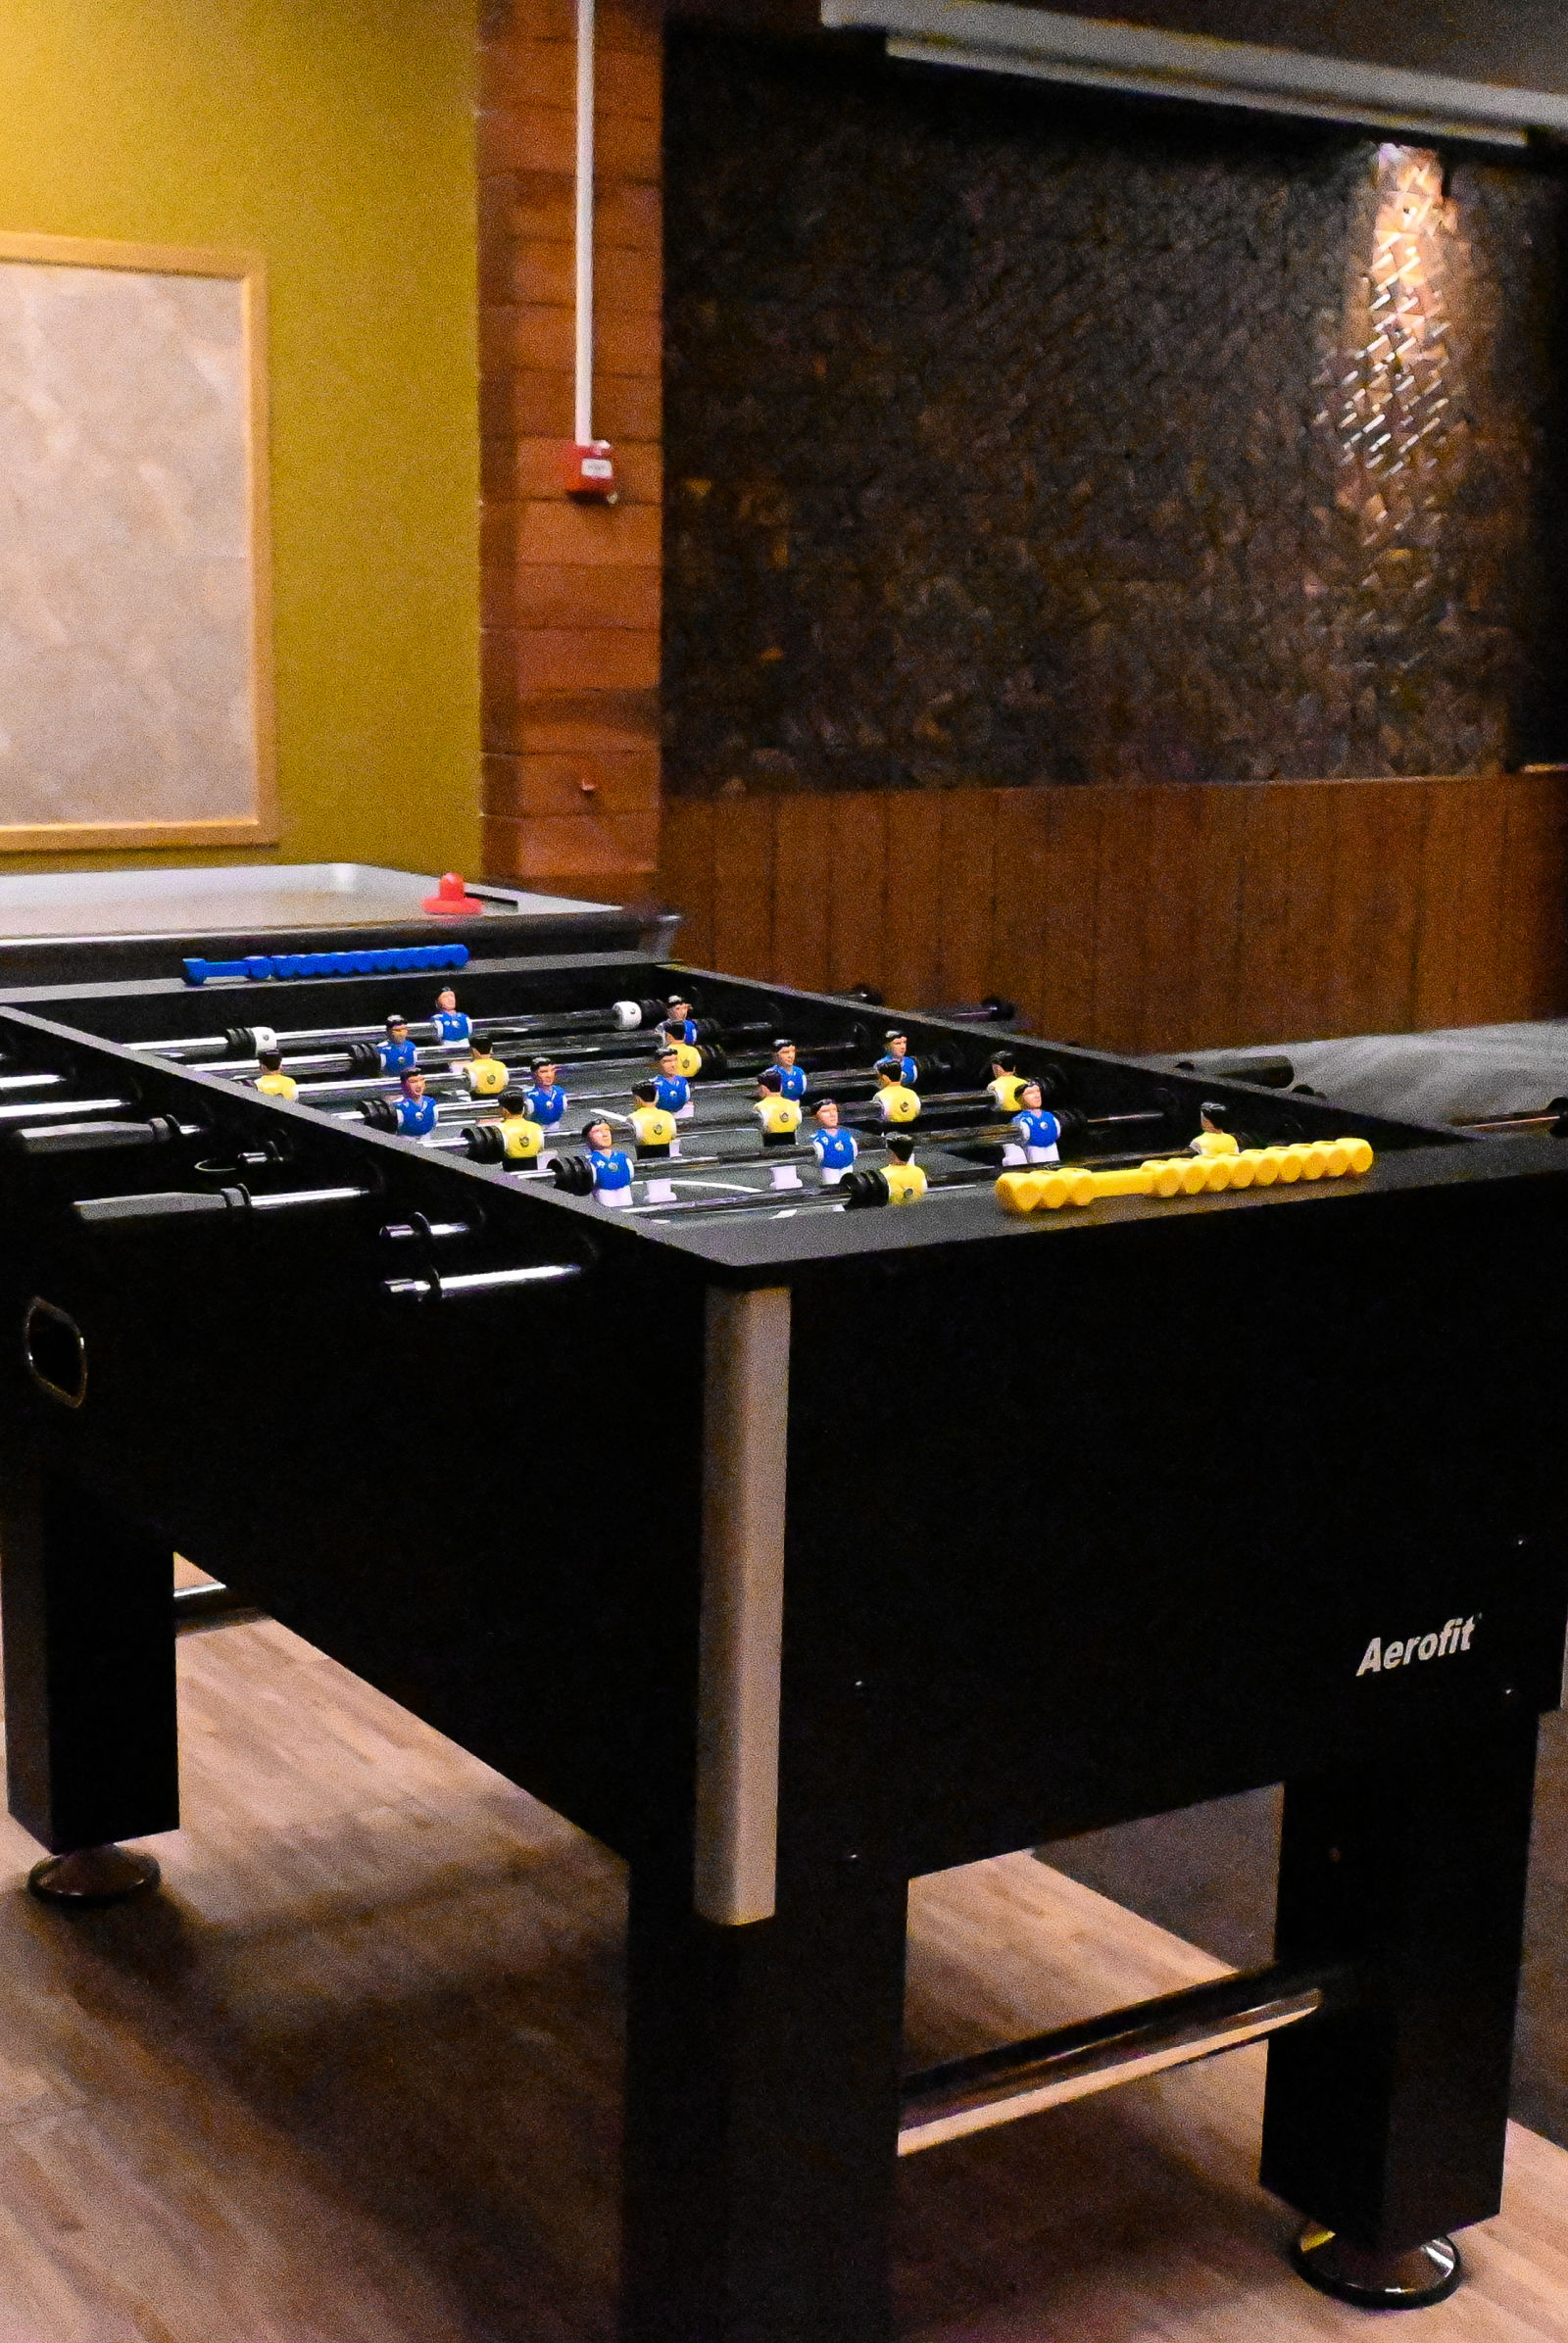 A game room with a Foosball table and an air hockey table in a warmly lit indoor setting - Coral Reef Resort & Spa, Havelock